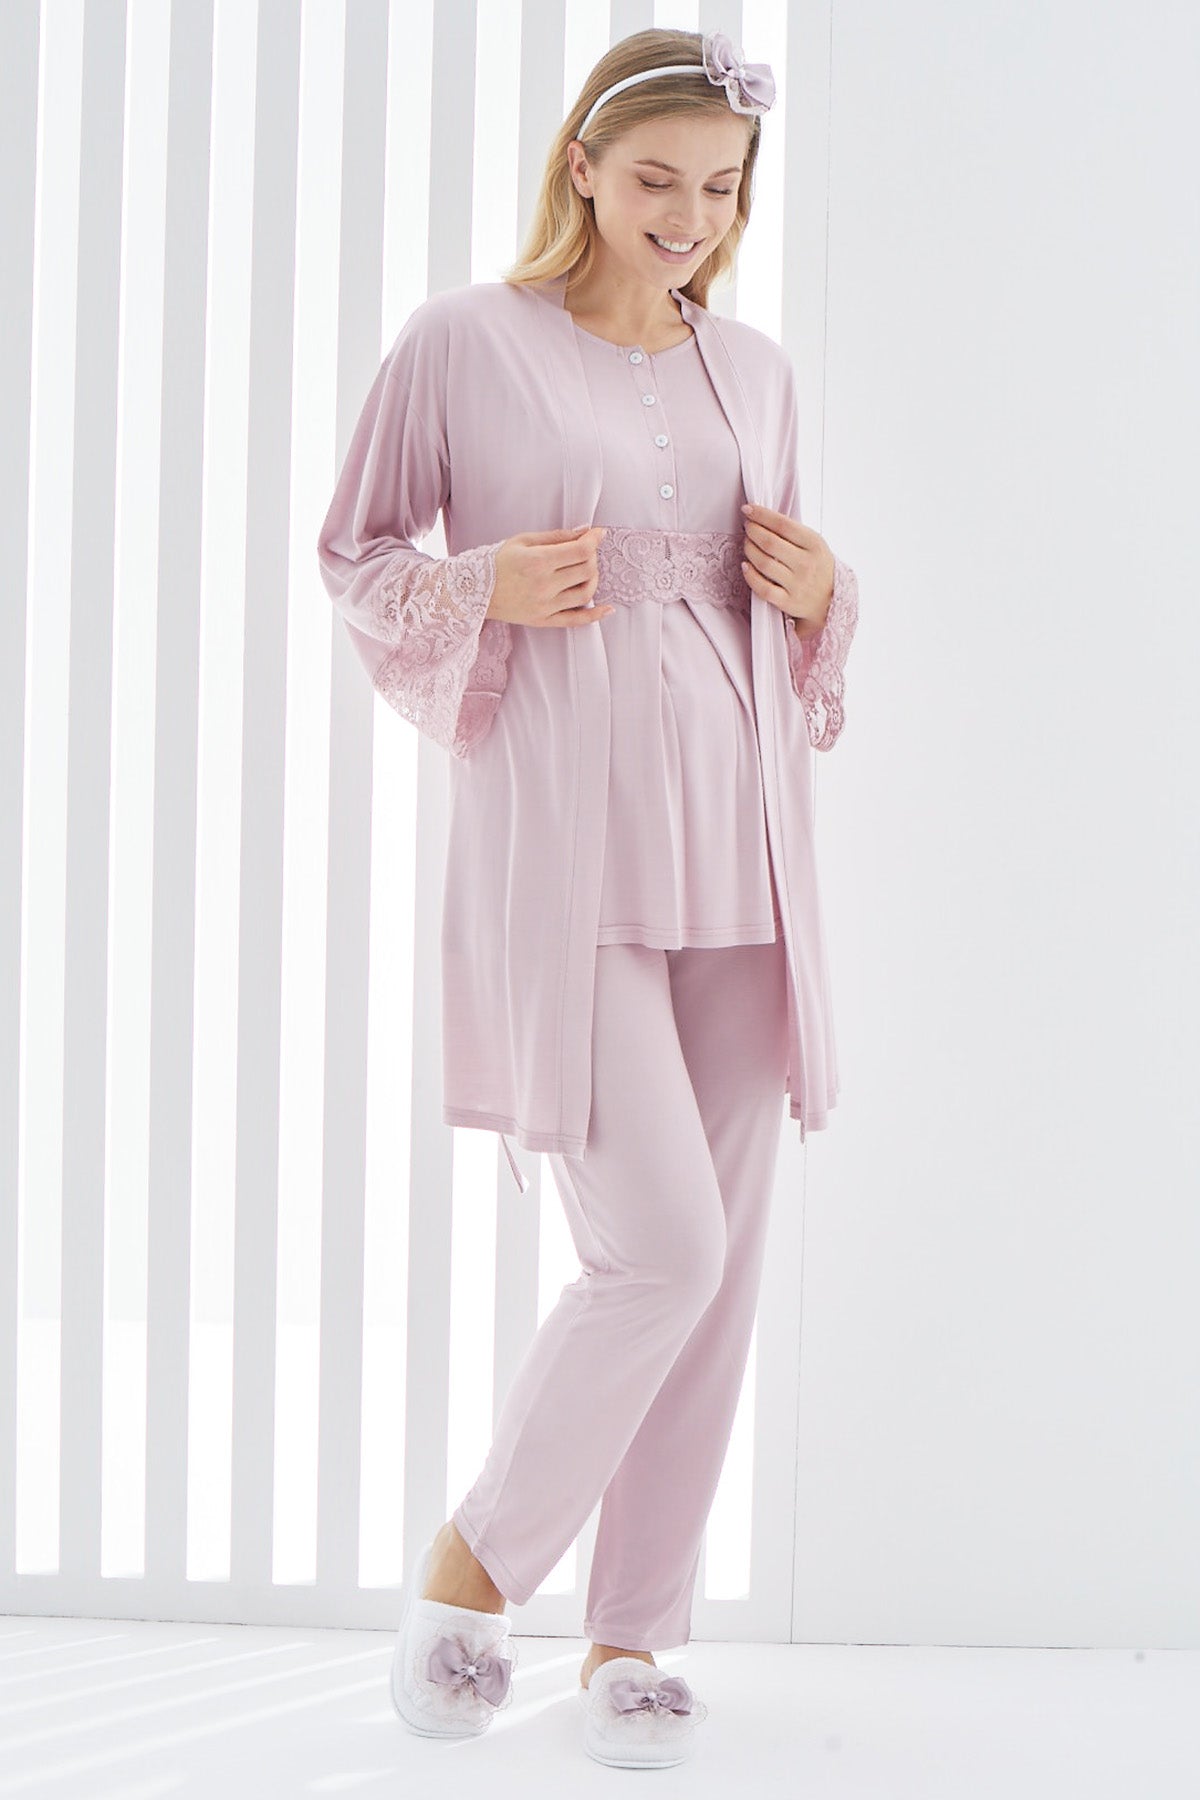 Shopymommy 3412 Lace 3-Pieces Maternity & Nursing Pajamas With Lace Flywheel Arm Robe Dried Rose